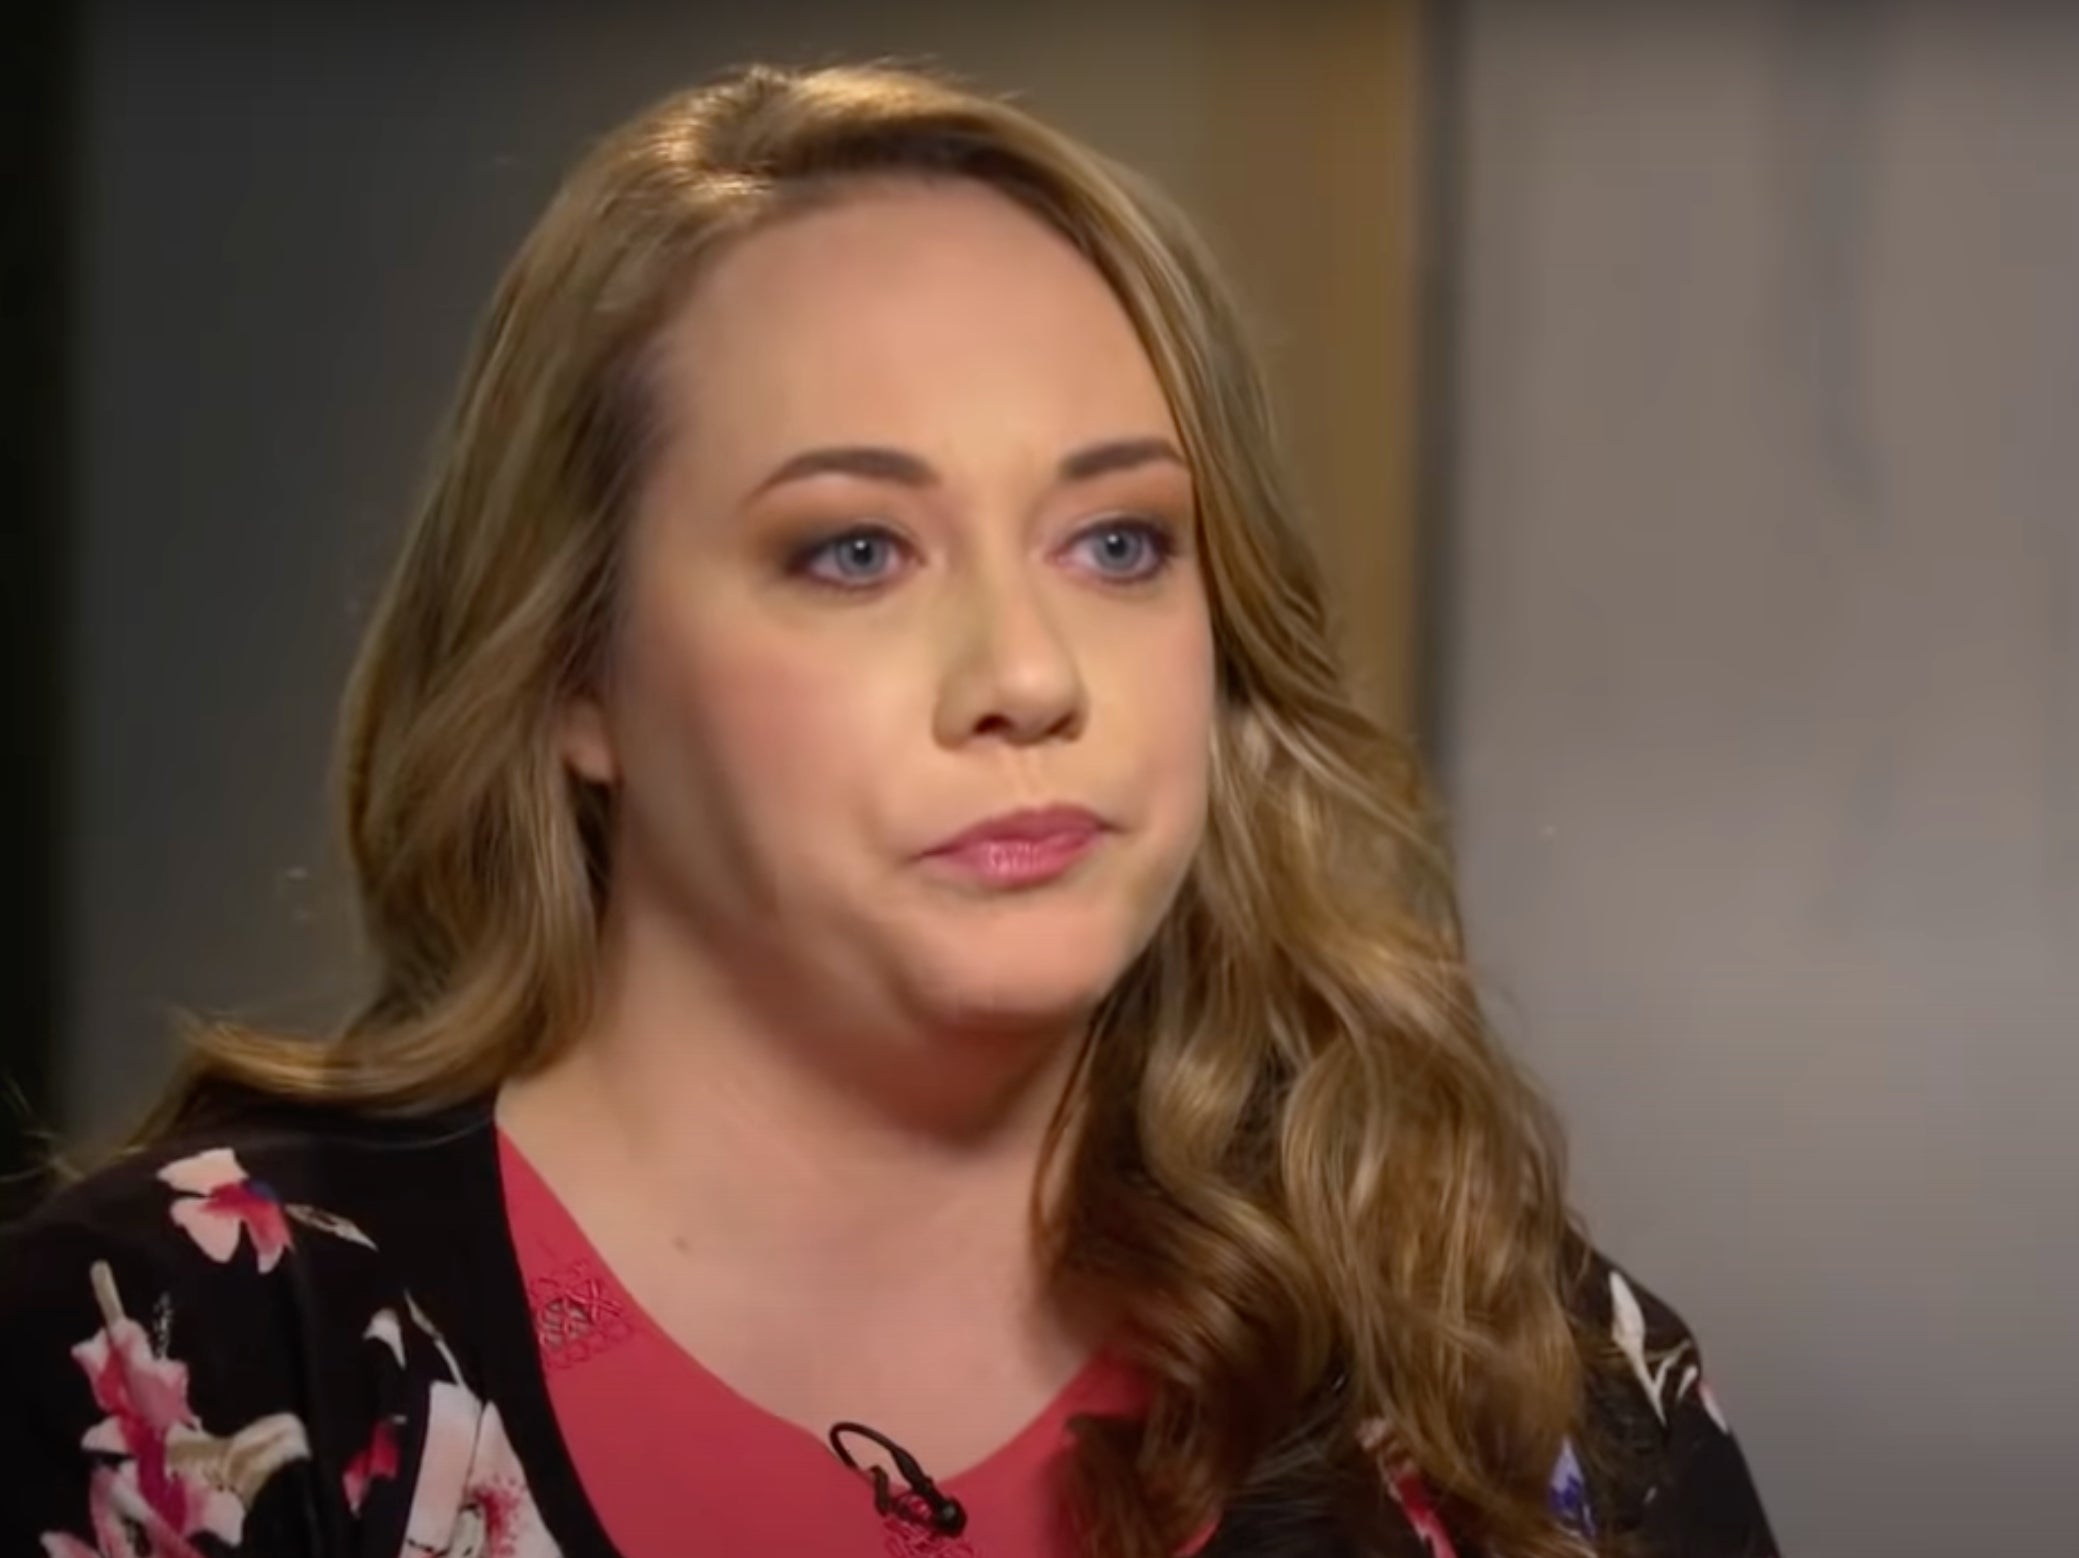 Leanna Taylor speaking with ABC News in 2018, in what was then her first public interview about her son’s death